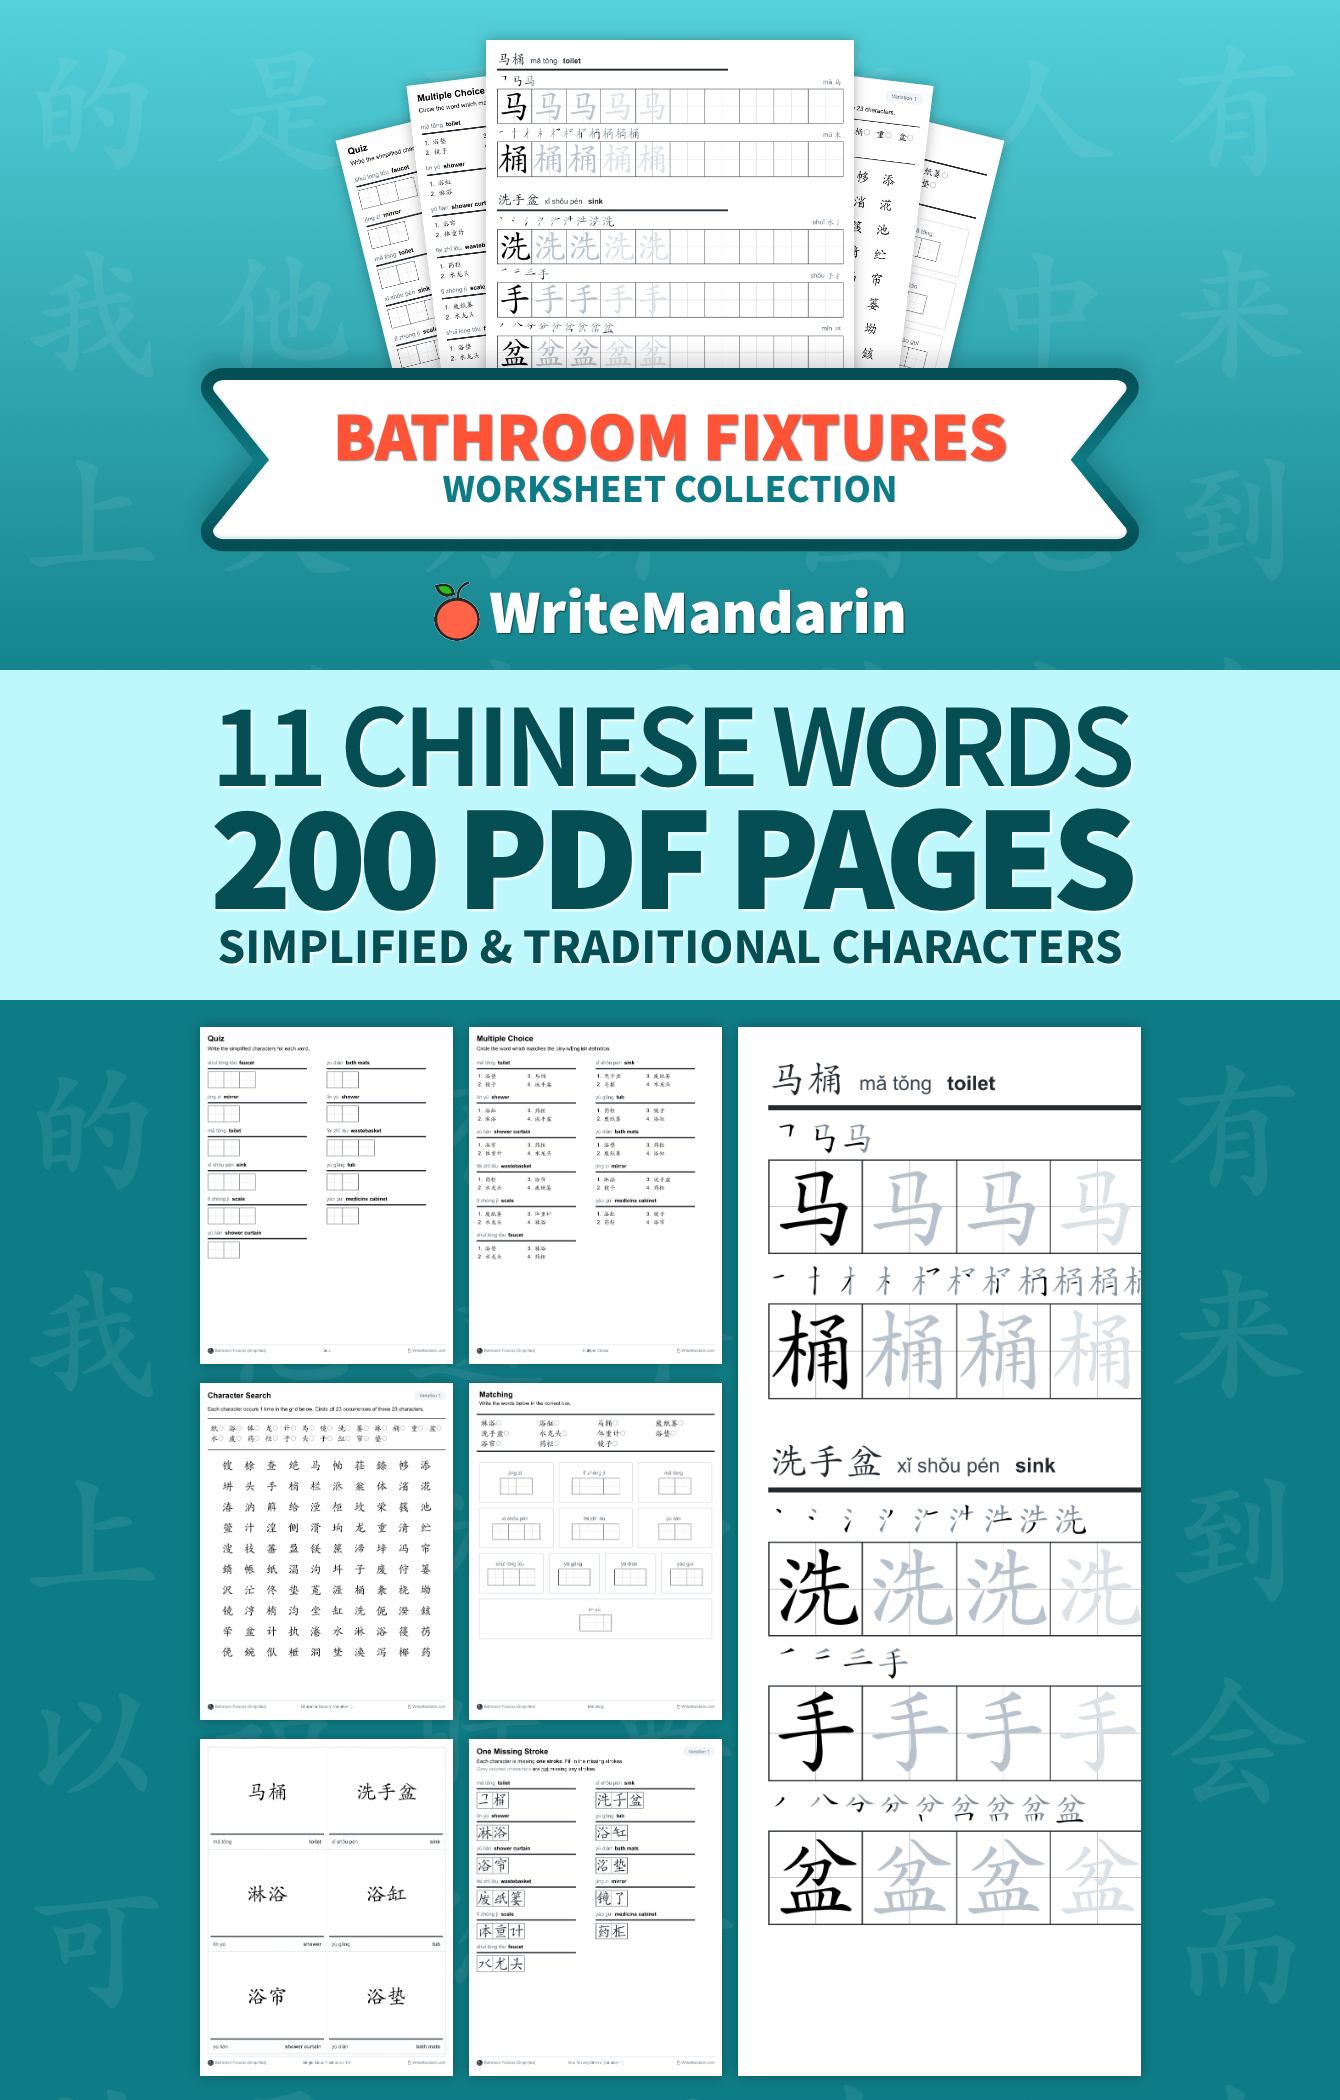 Preview image of Bathroom Fixtures worksheet collection